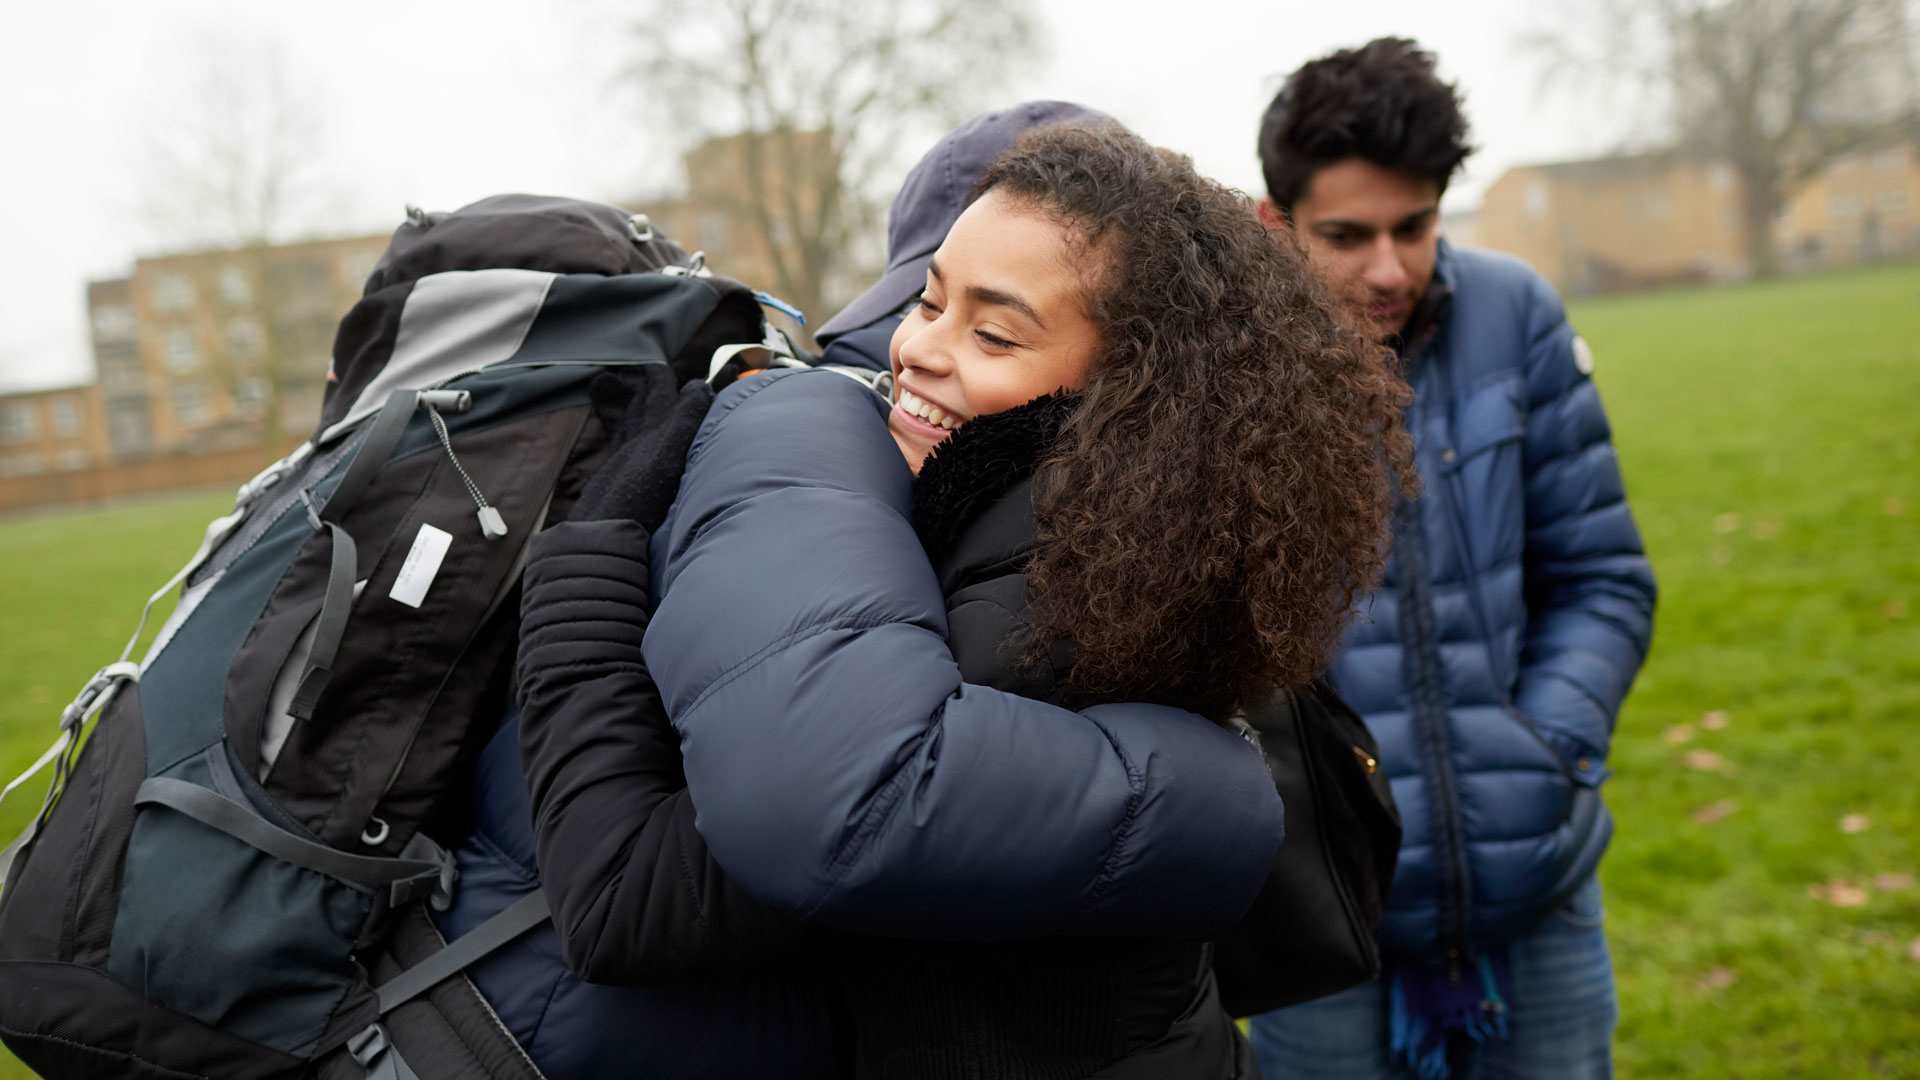 medium-shot-of-a-young-woman-with-curly-hair-smiling-while-hugging-another-person-with-face-unseen-and-wearing-a-cap-blue-jacket-and-a-huge-backpack-with-another-young-man-looking-down-with-school-building-on-background